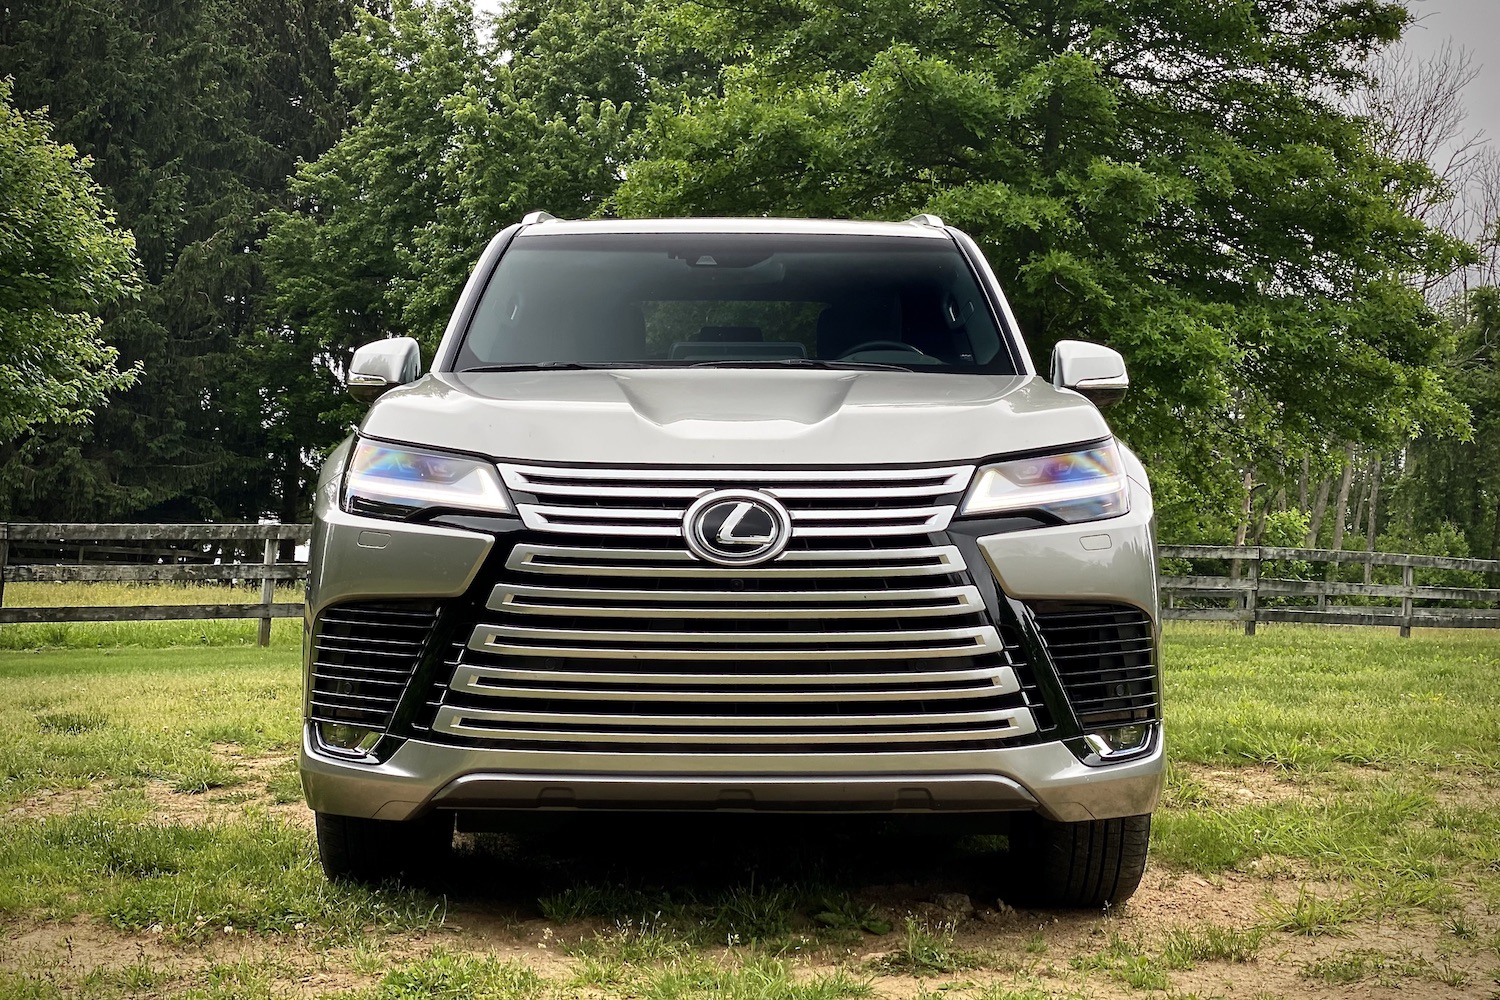 Close up of 2022 Lexus LX 600 front end on a patchy field of grass with trees in the back.